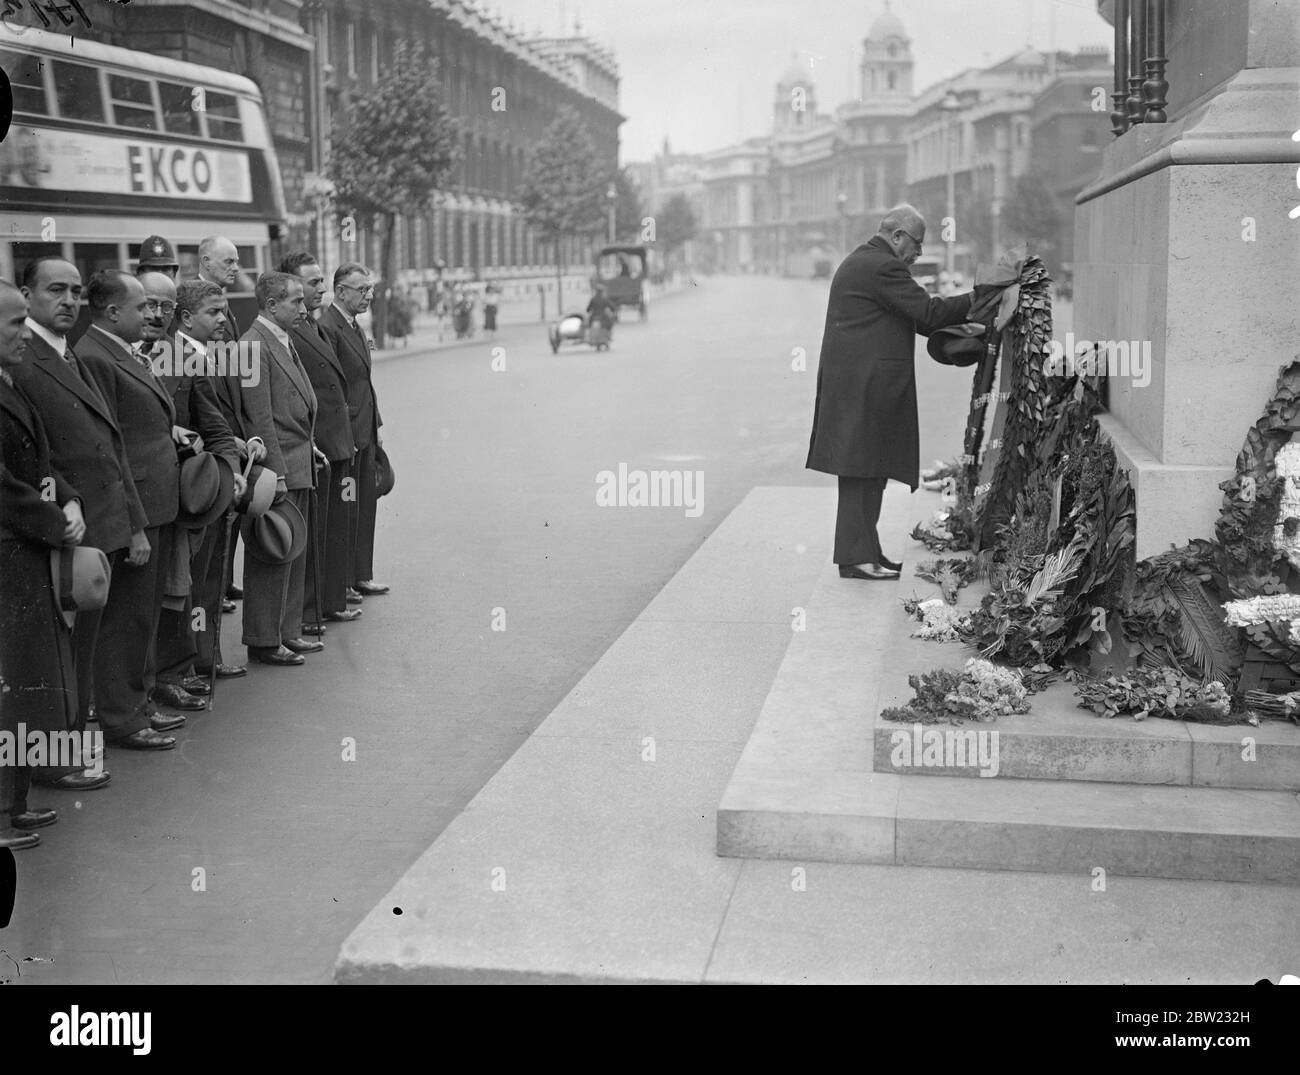 Khalil Bey Thabet, Editor of Al Mekatten laying the wreath on the cenotaph. A party of nine distinguished Egyptian newspaper proprietors and editors who are visiting London as the guests of the Travel and Industrial Development Association of Great Britain and Ireland at Whitehall. 16 September 1937. Stock Photo